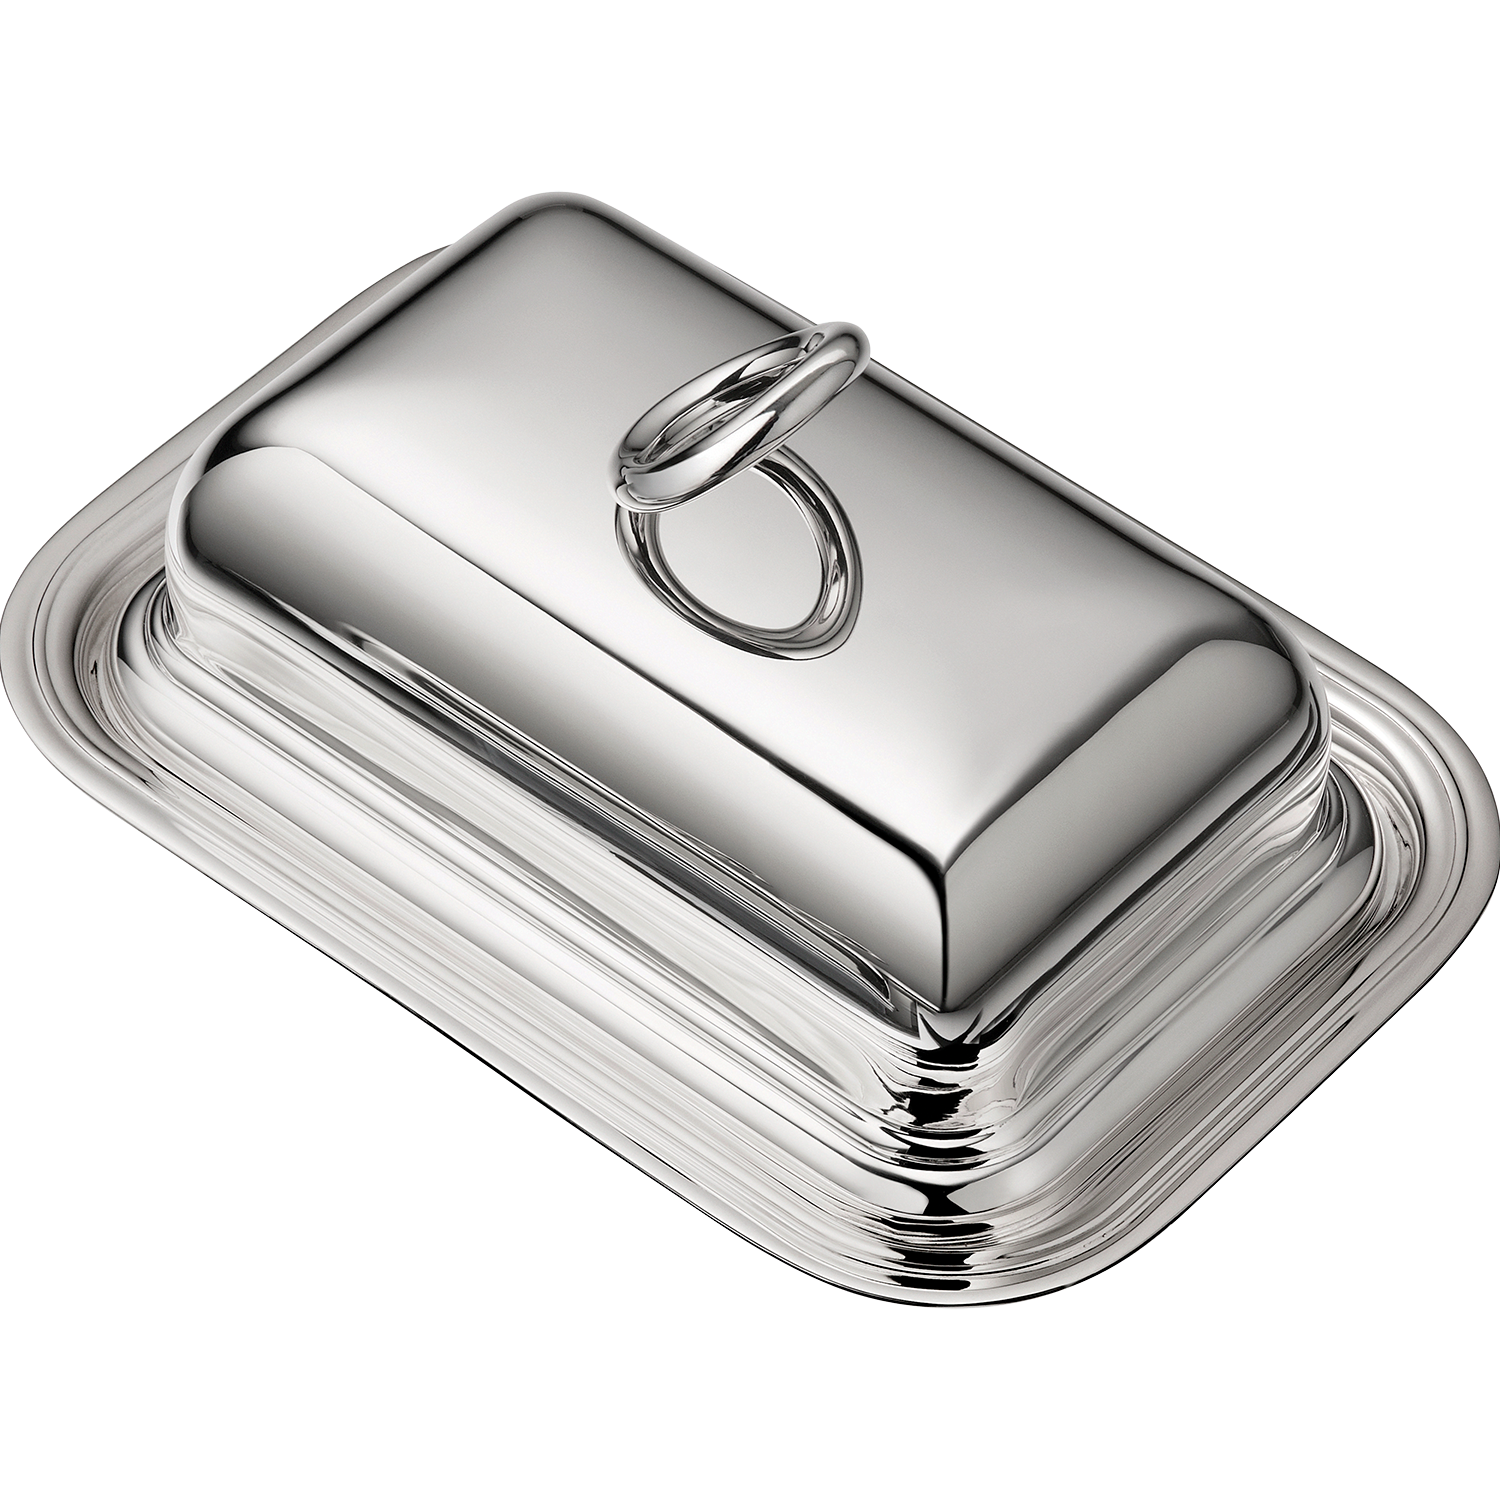 Silver-Plated butter dish with lid